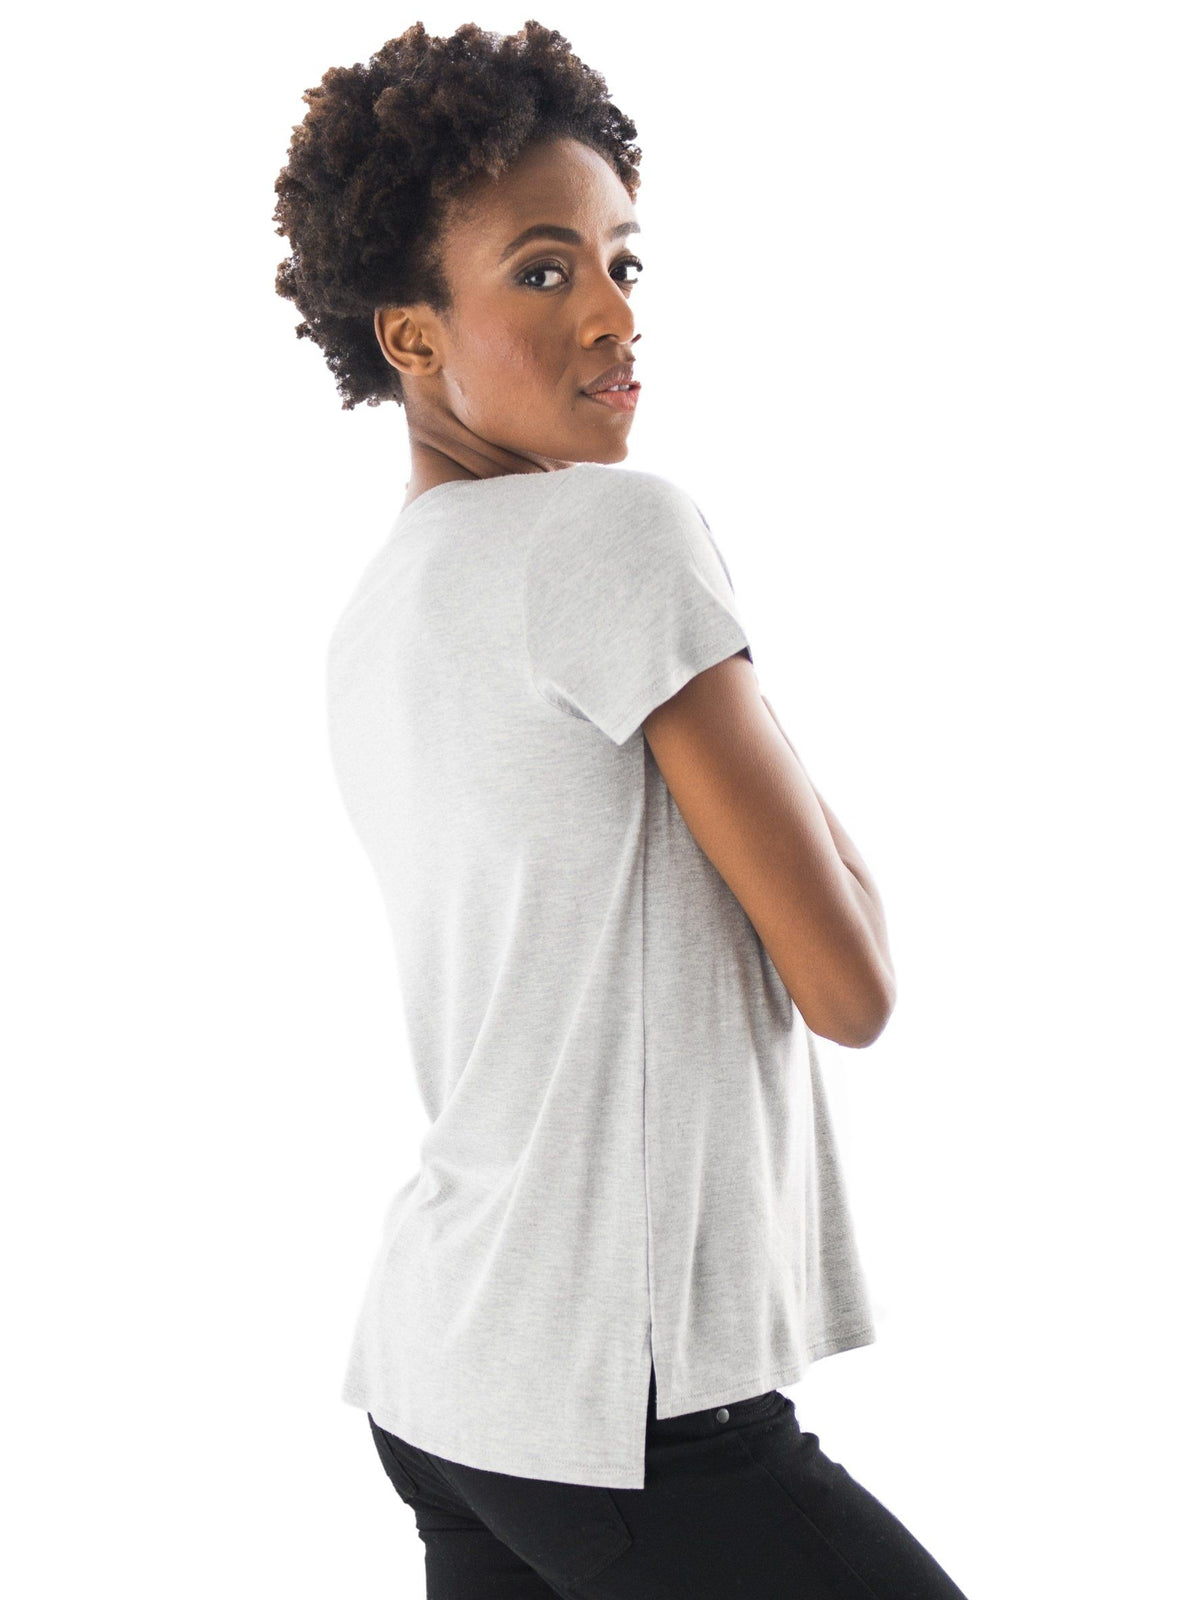 Tyler Pocket Tee softest maternity not maternity not fitted Tops alex & harry One Size Heather Grey 